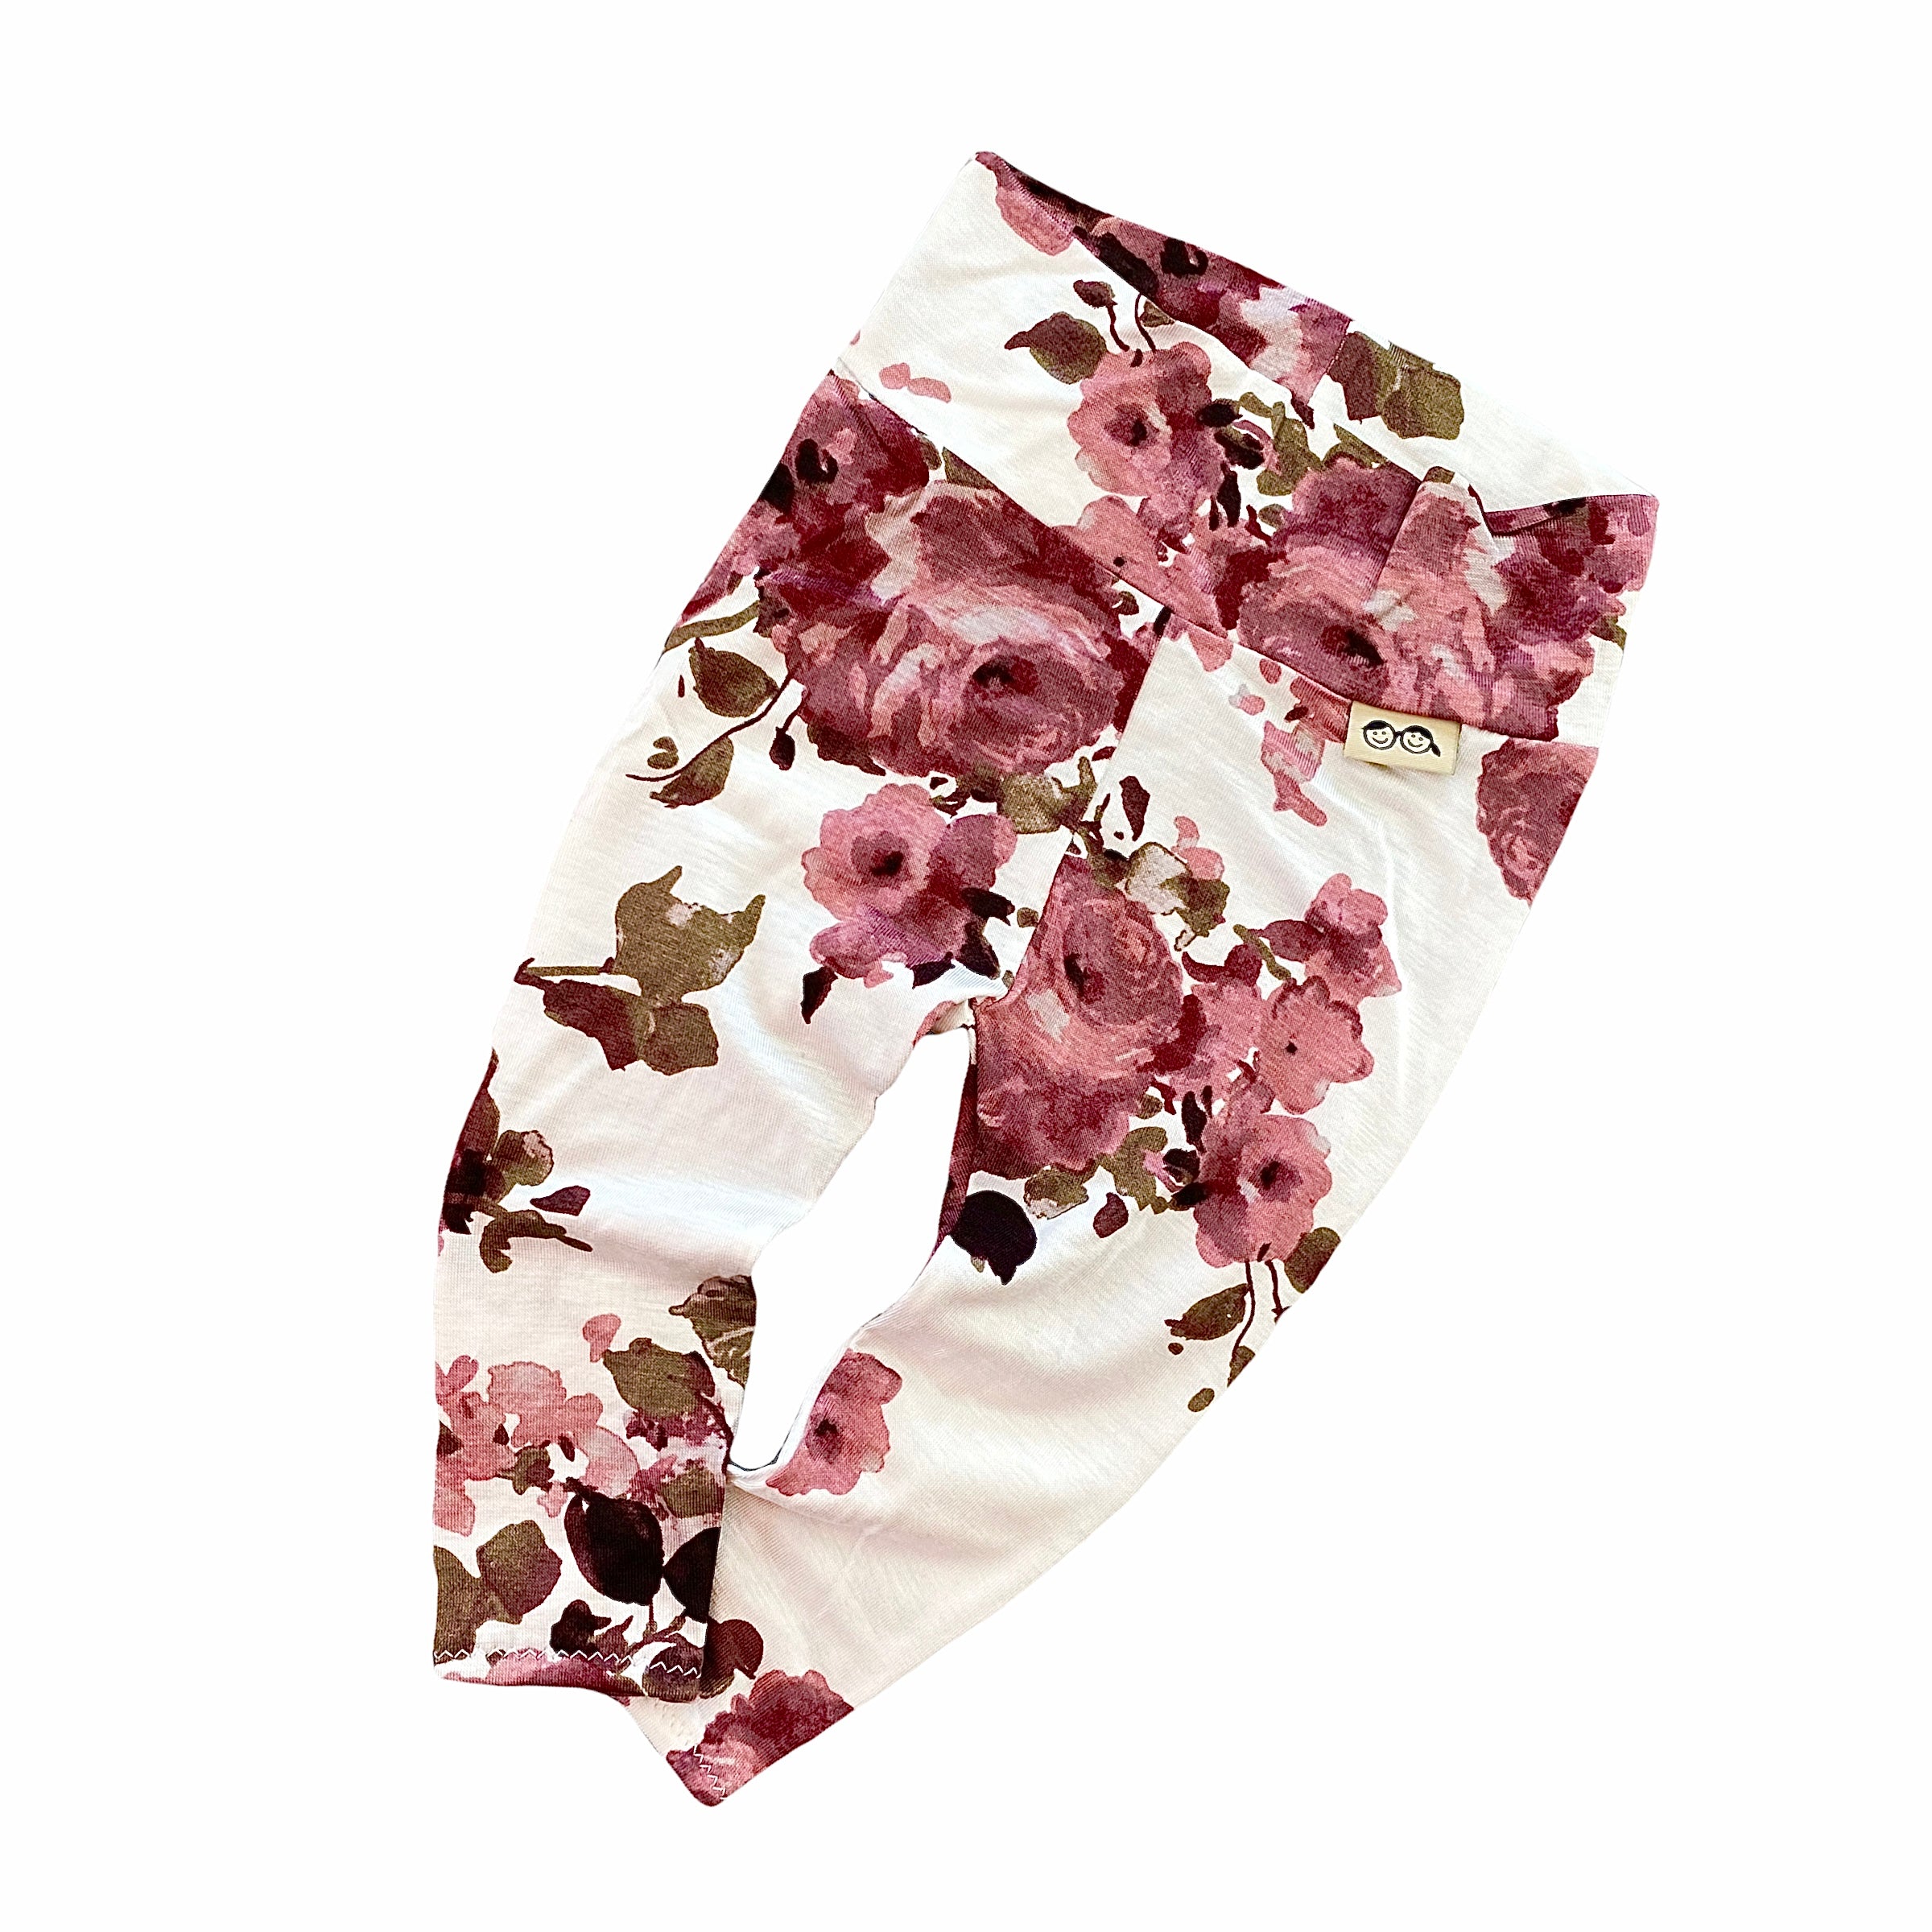 Vintage Florals on White Leggings and/or Headbands